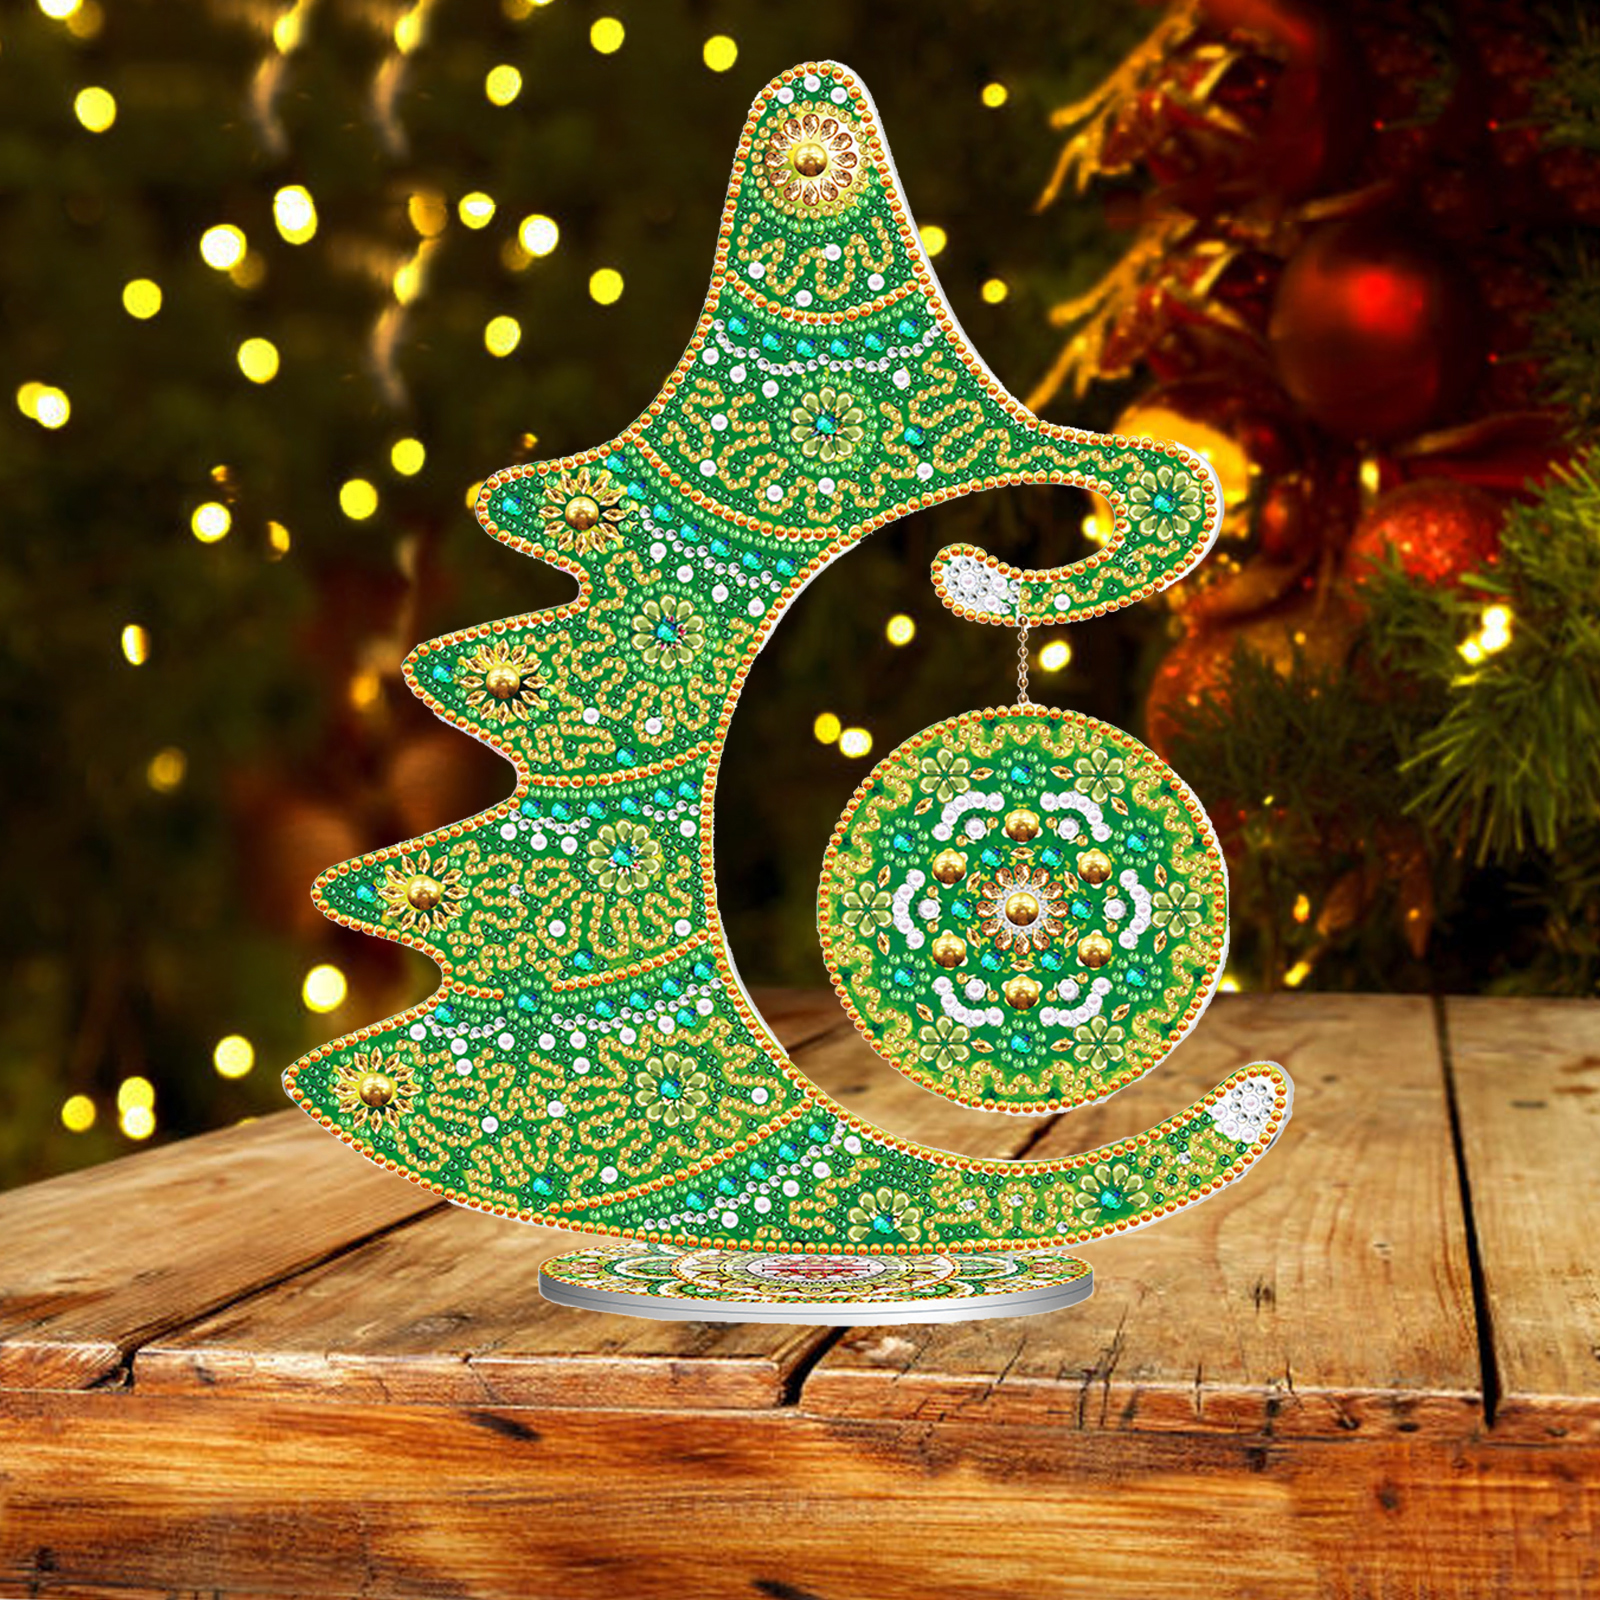 Diamond Painting Christmas Tree Craft 5D DIY Kit Ornament Gifts for New Year 23.5x28.5cm